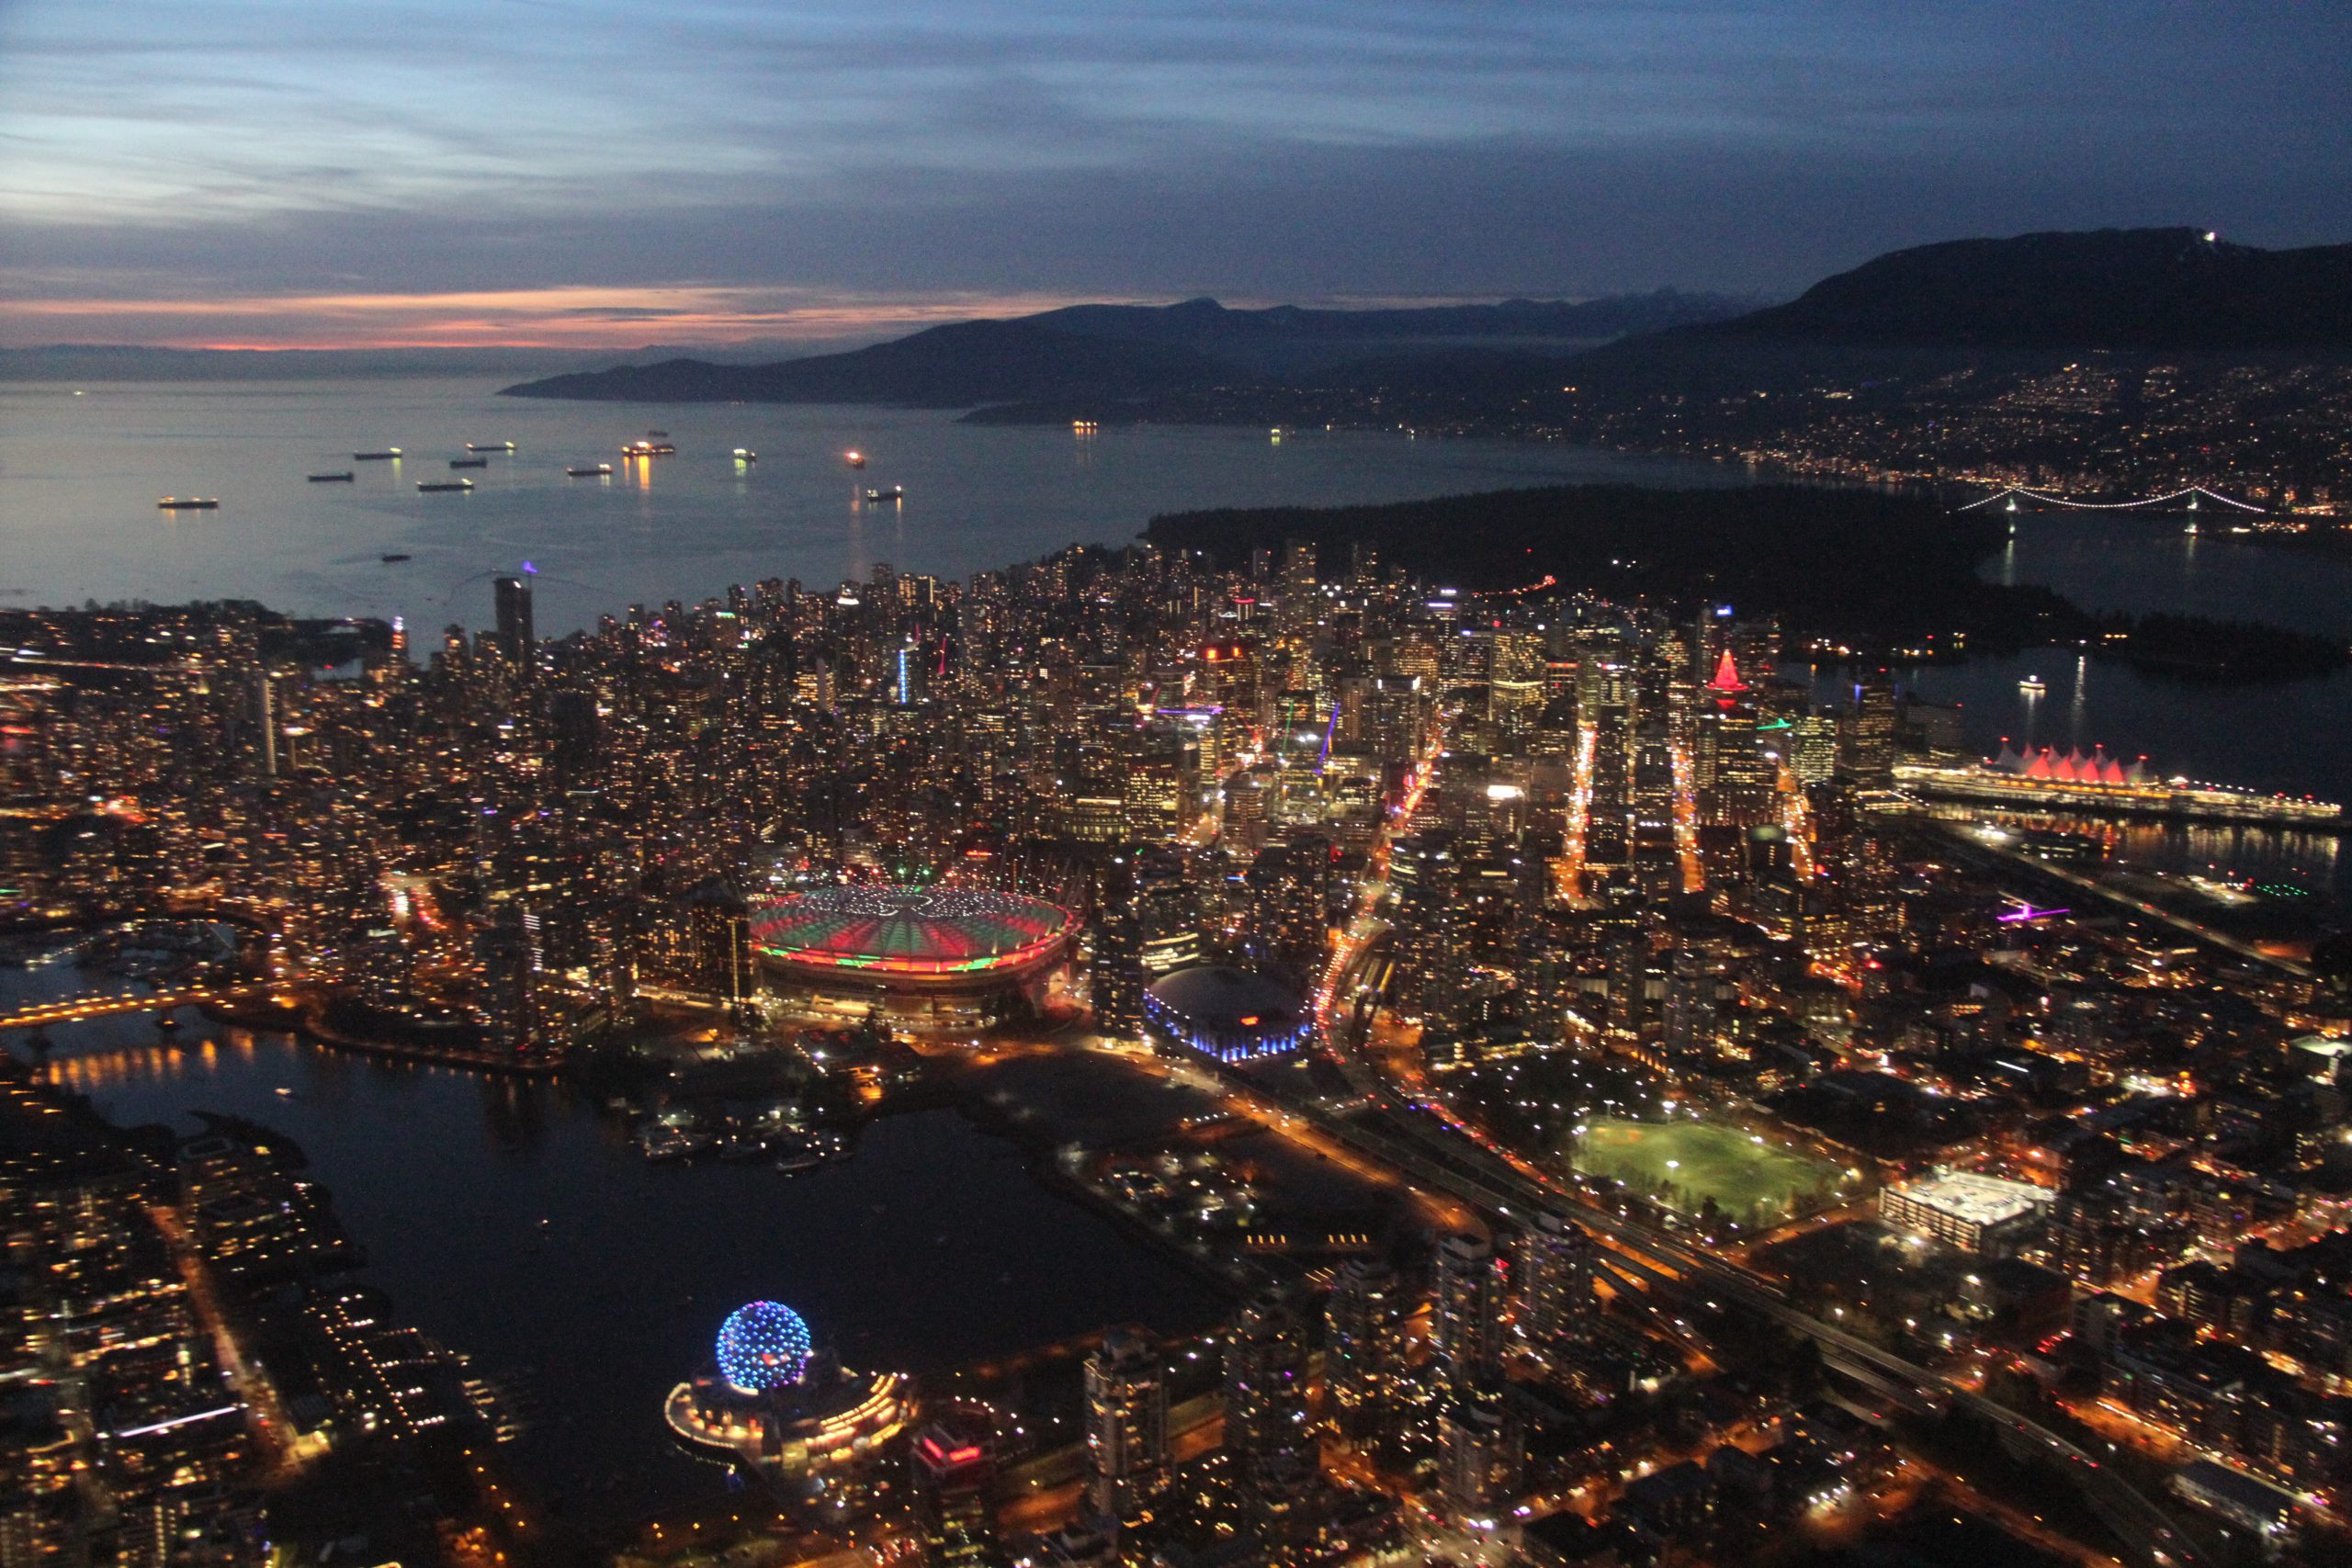 Vancouver mayor aims to amplify nightlife if re-elected